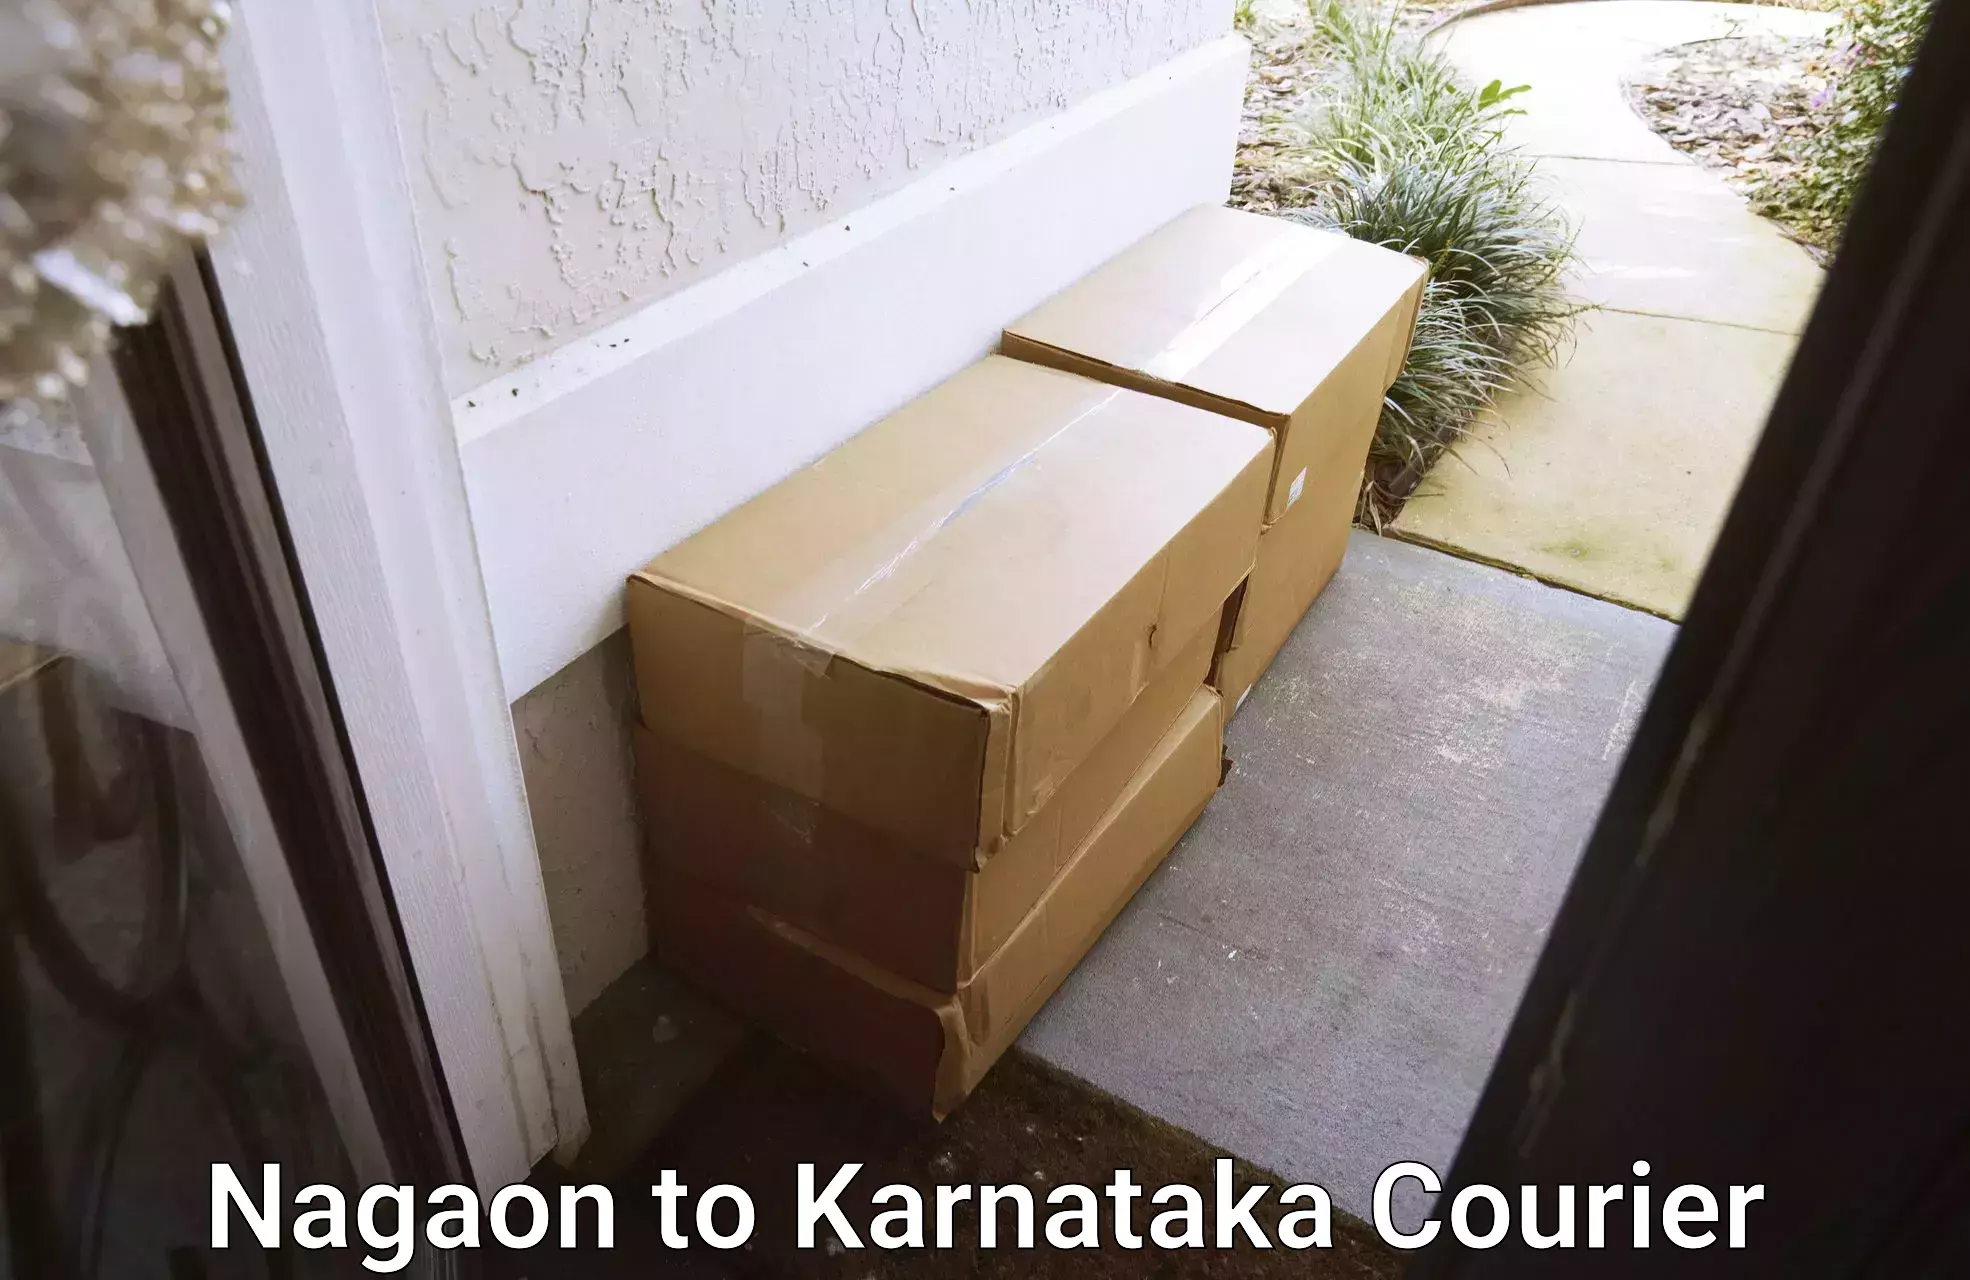 State-of-the-art courier technology in Nagaon to Chitradurga